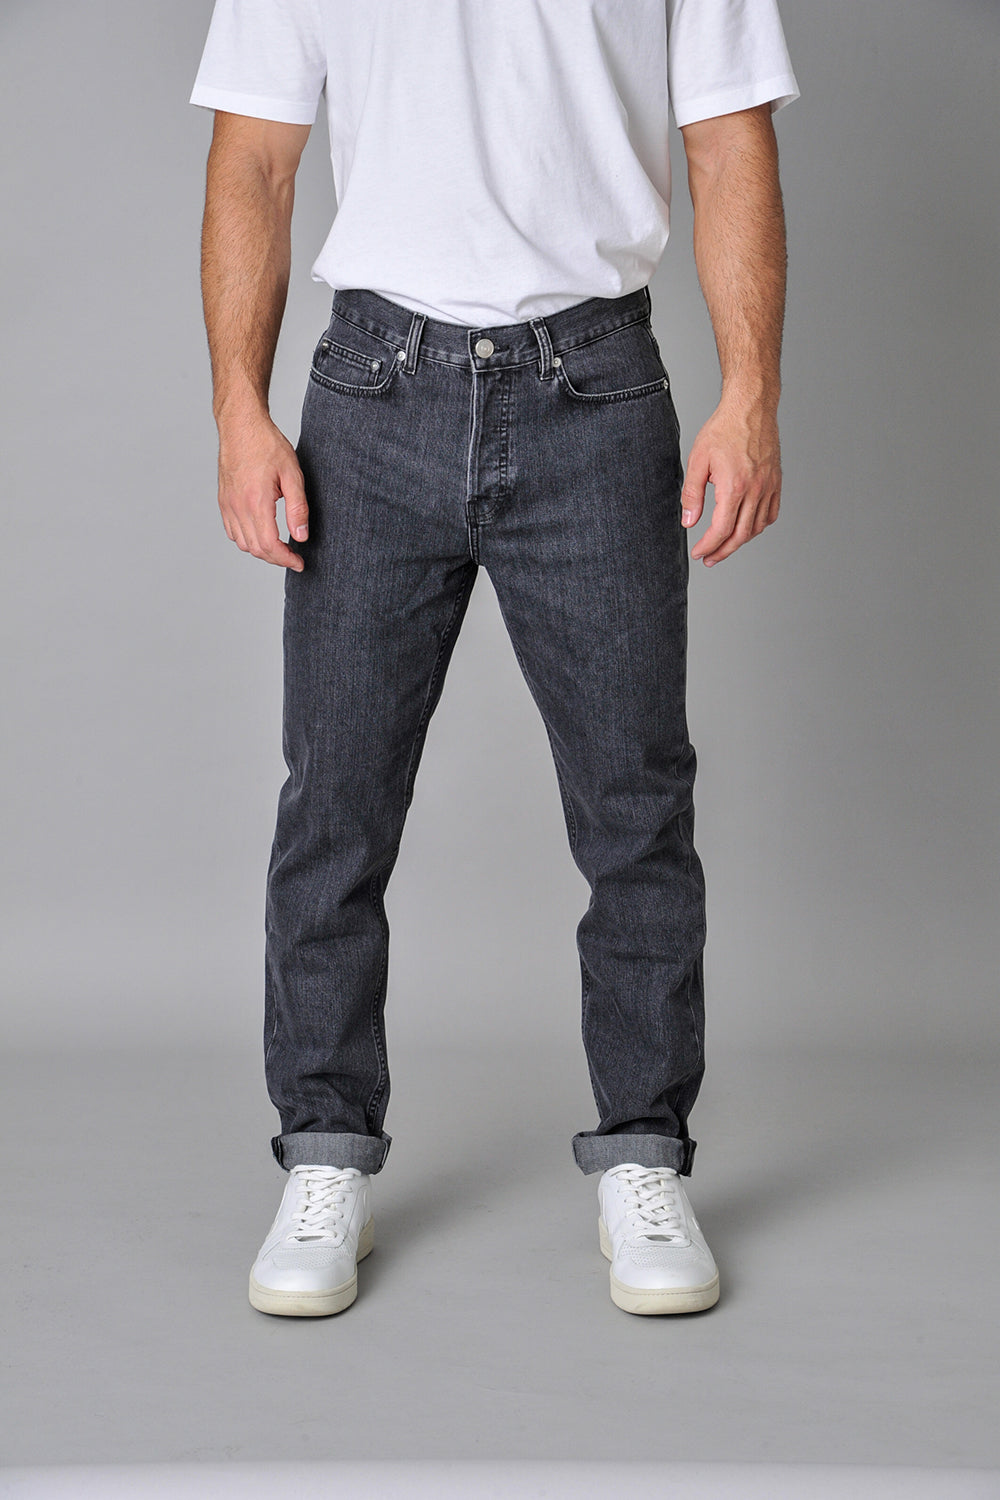 the good neighbour tapered jeans in black